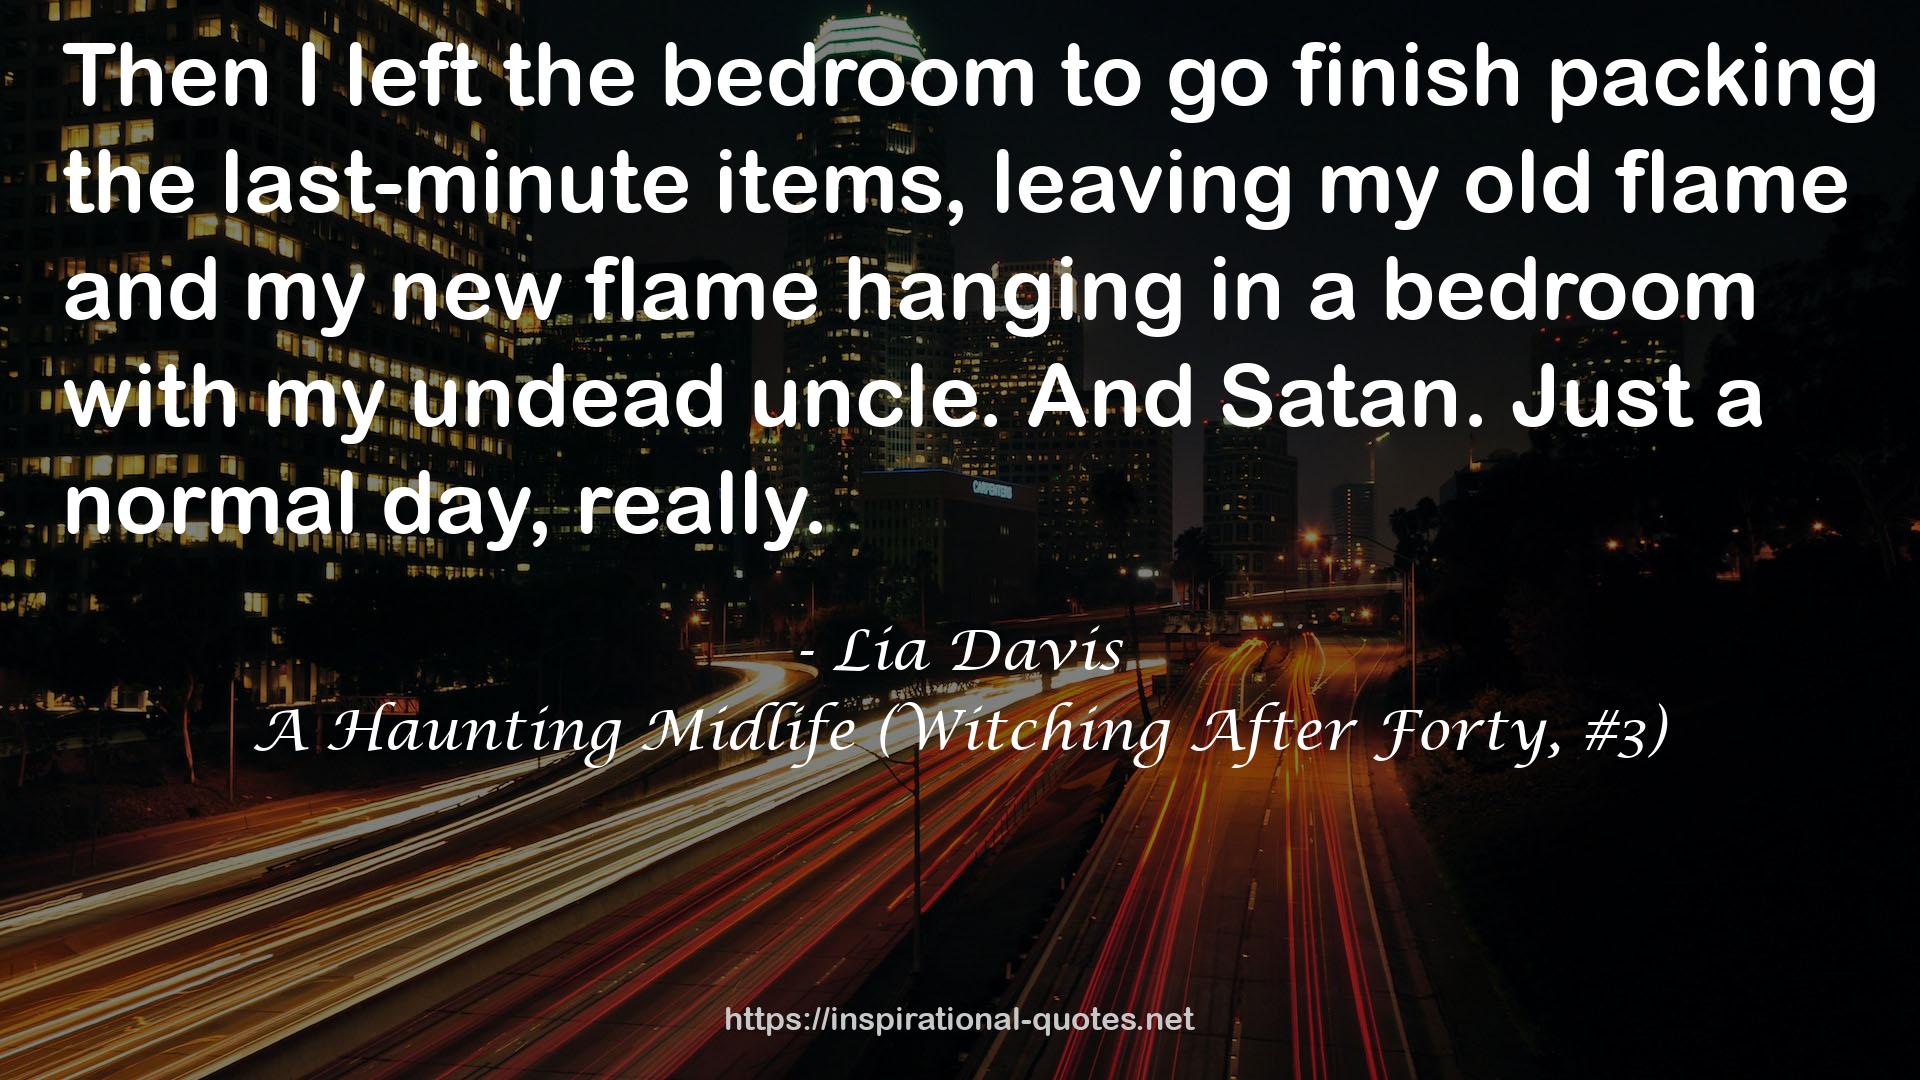 A Haunting Midlife (Witching After Forty, #3) QUOTES